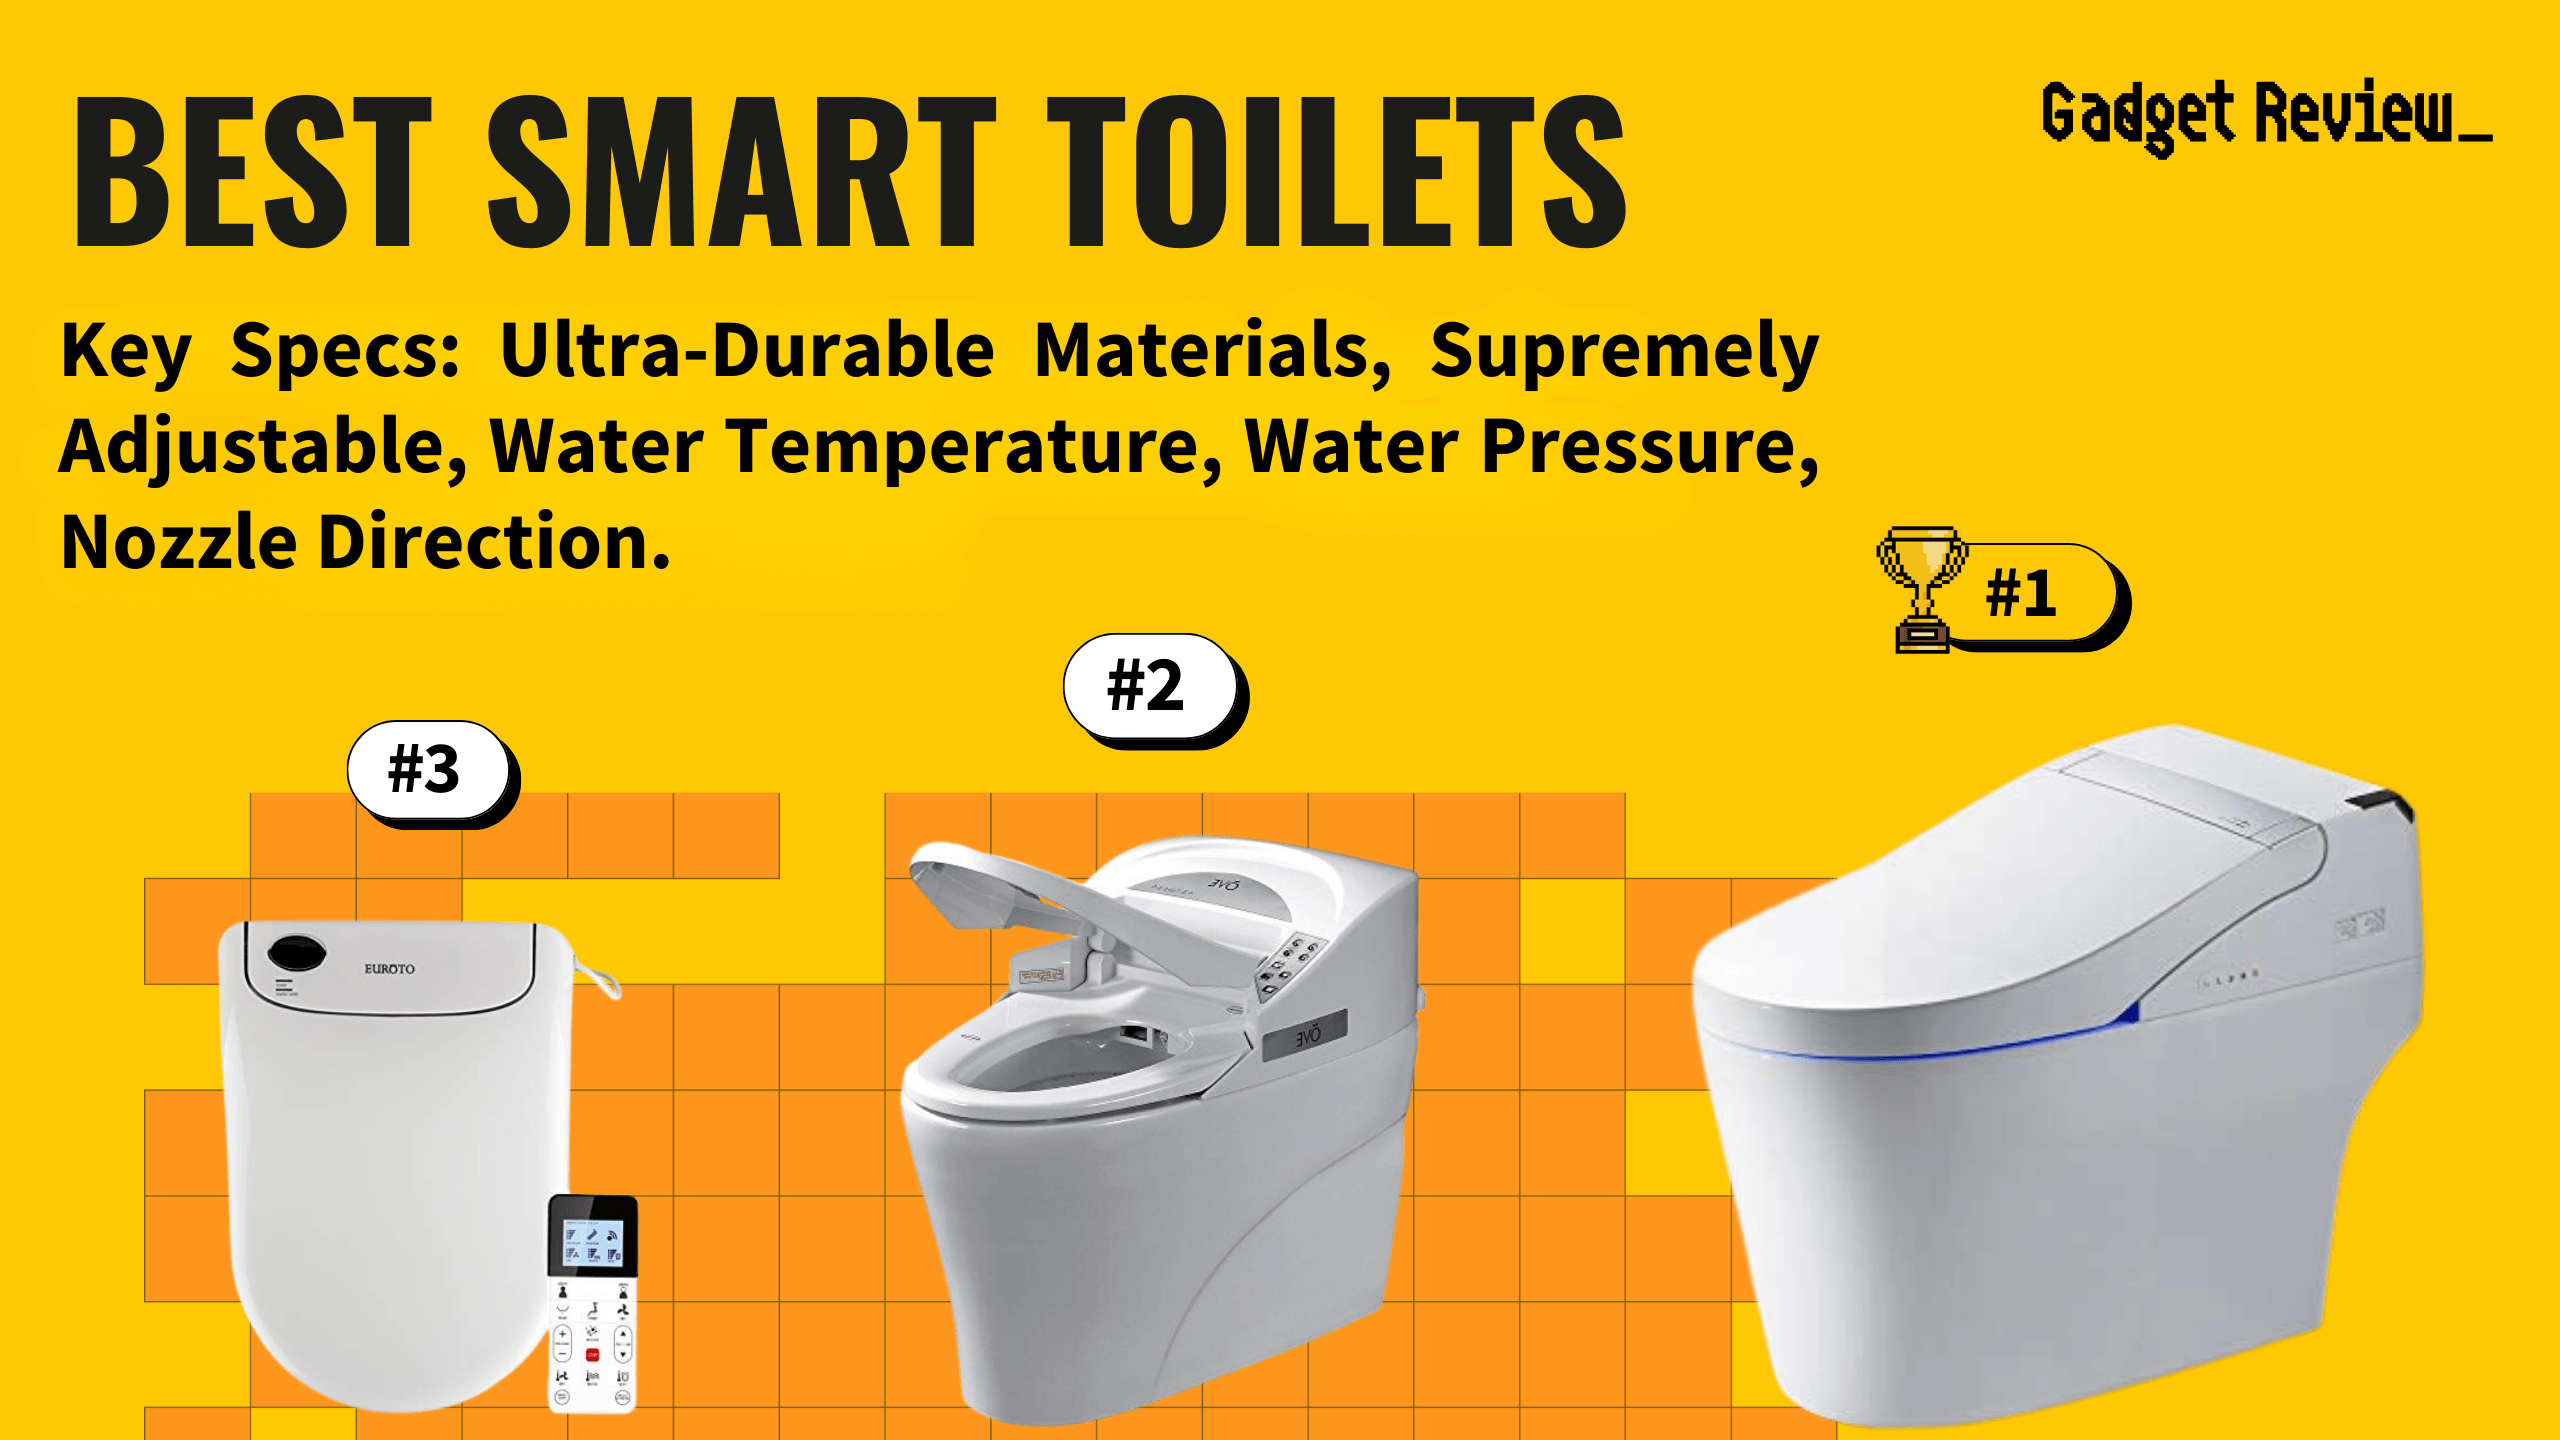 best smart toilet featured image that shows the top three best bathroom essential models